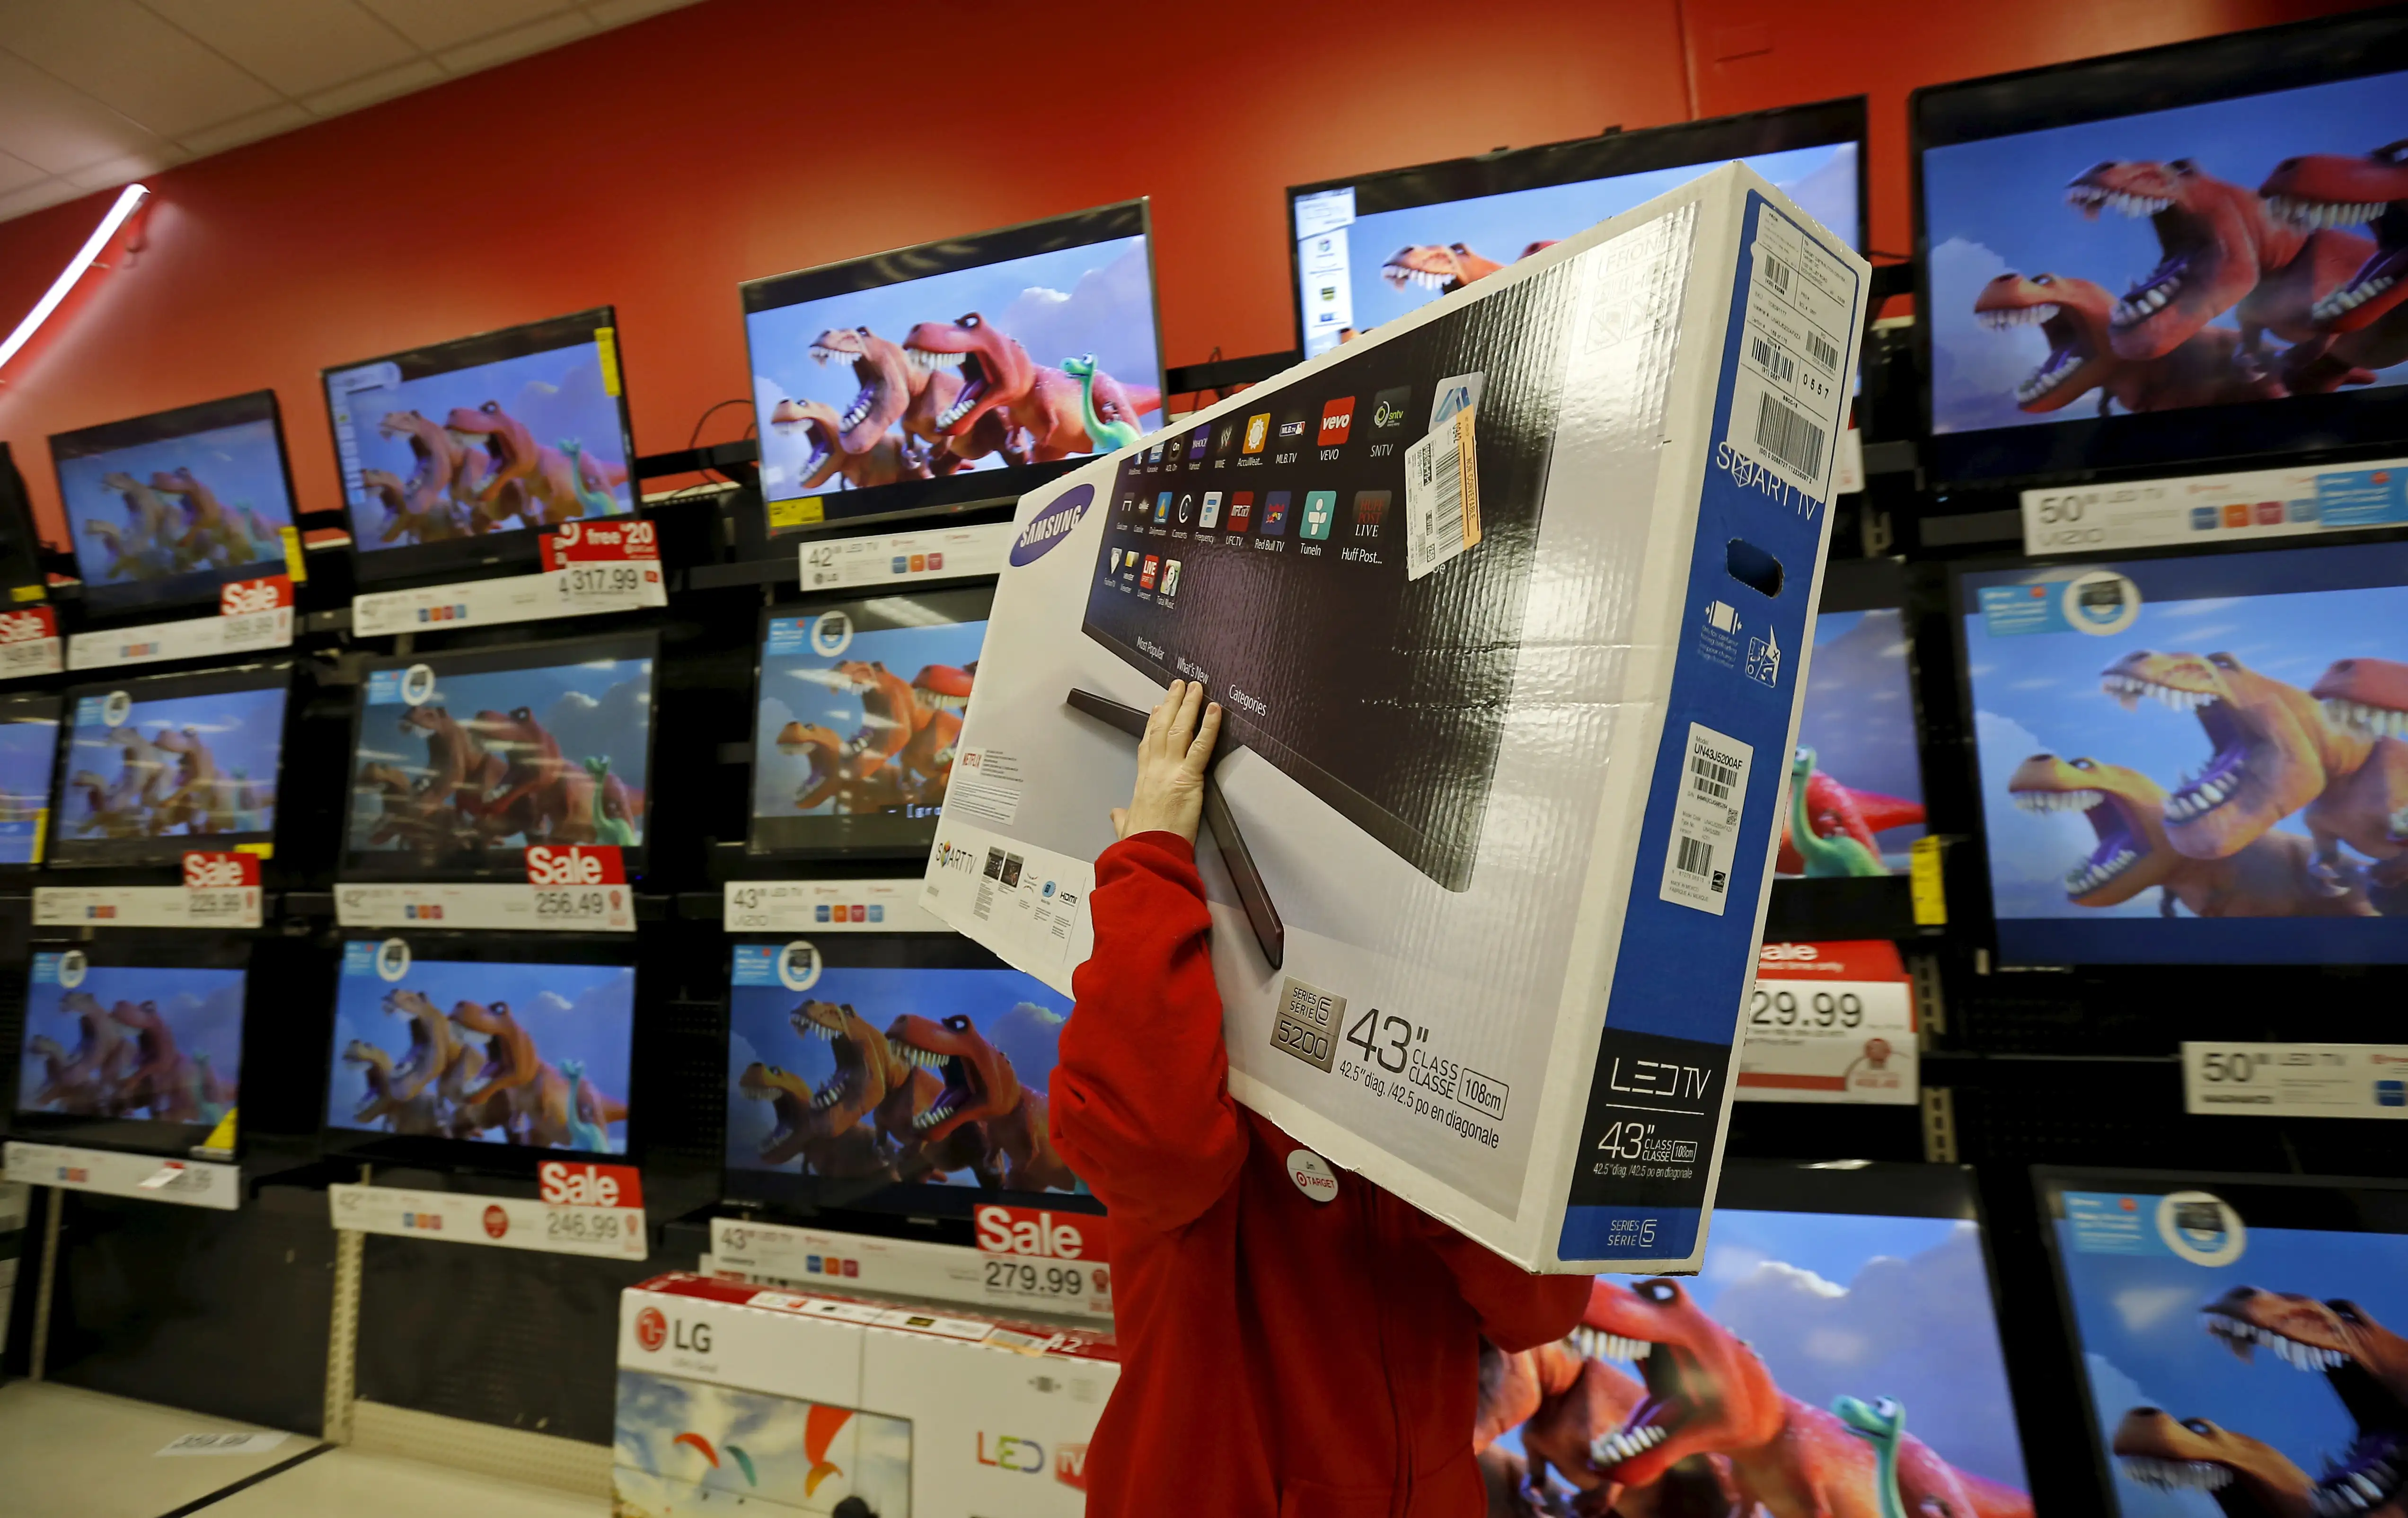 A worker carries a television for a customer who made a purchase during Black Friday Shopping at a Target store in Chicago, Illinois, November 27, 2015.